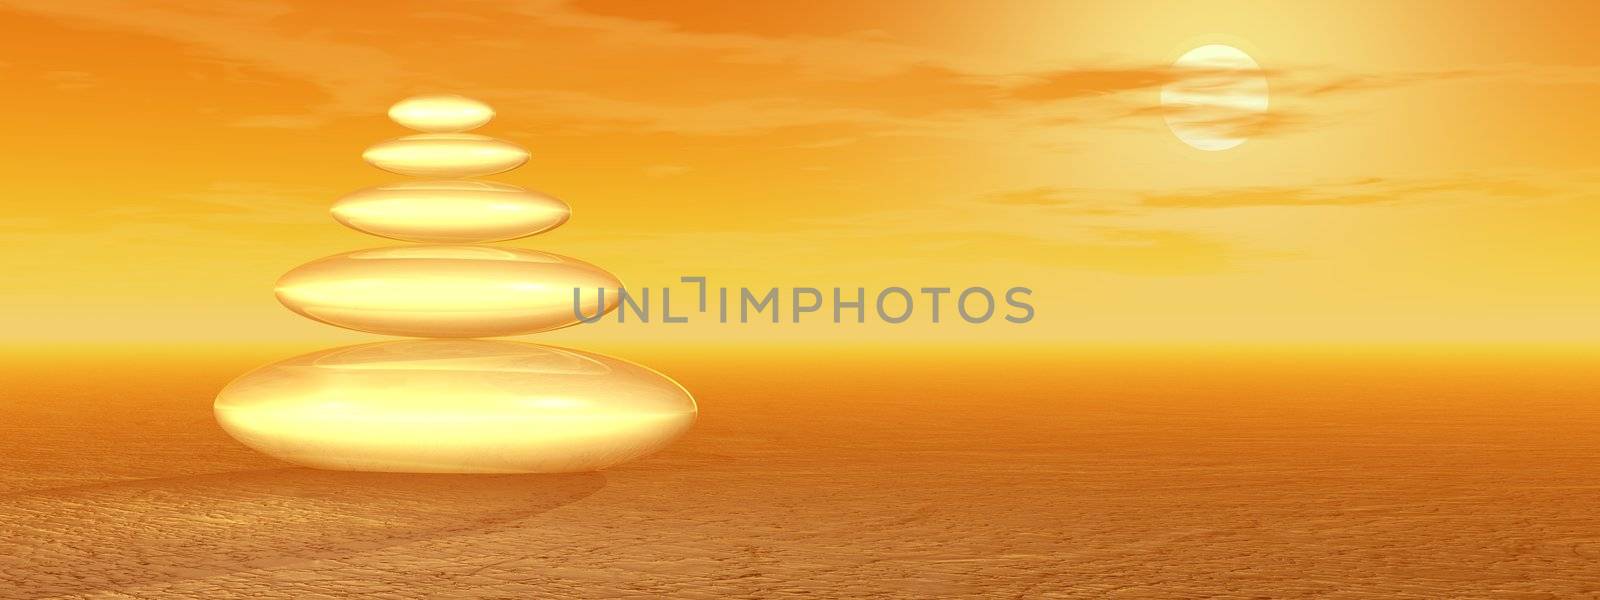 Balanced white stones upon the ocean and under a covering plant in an orange sunset background